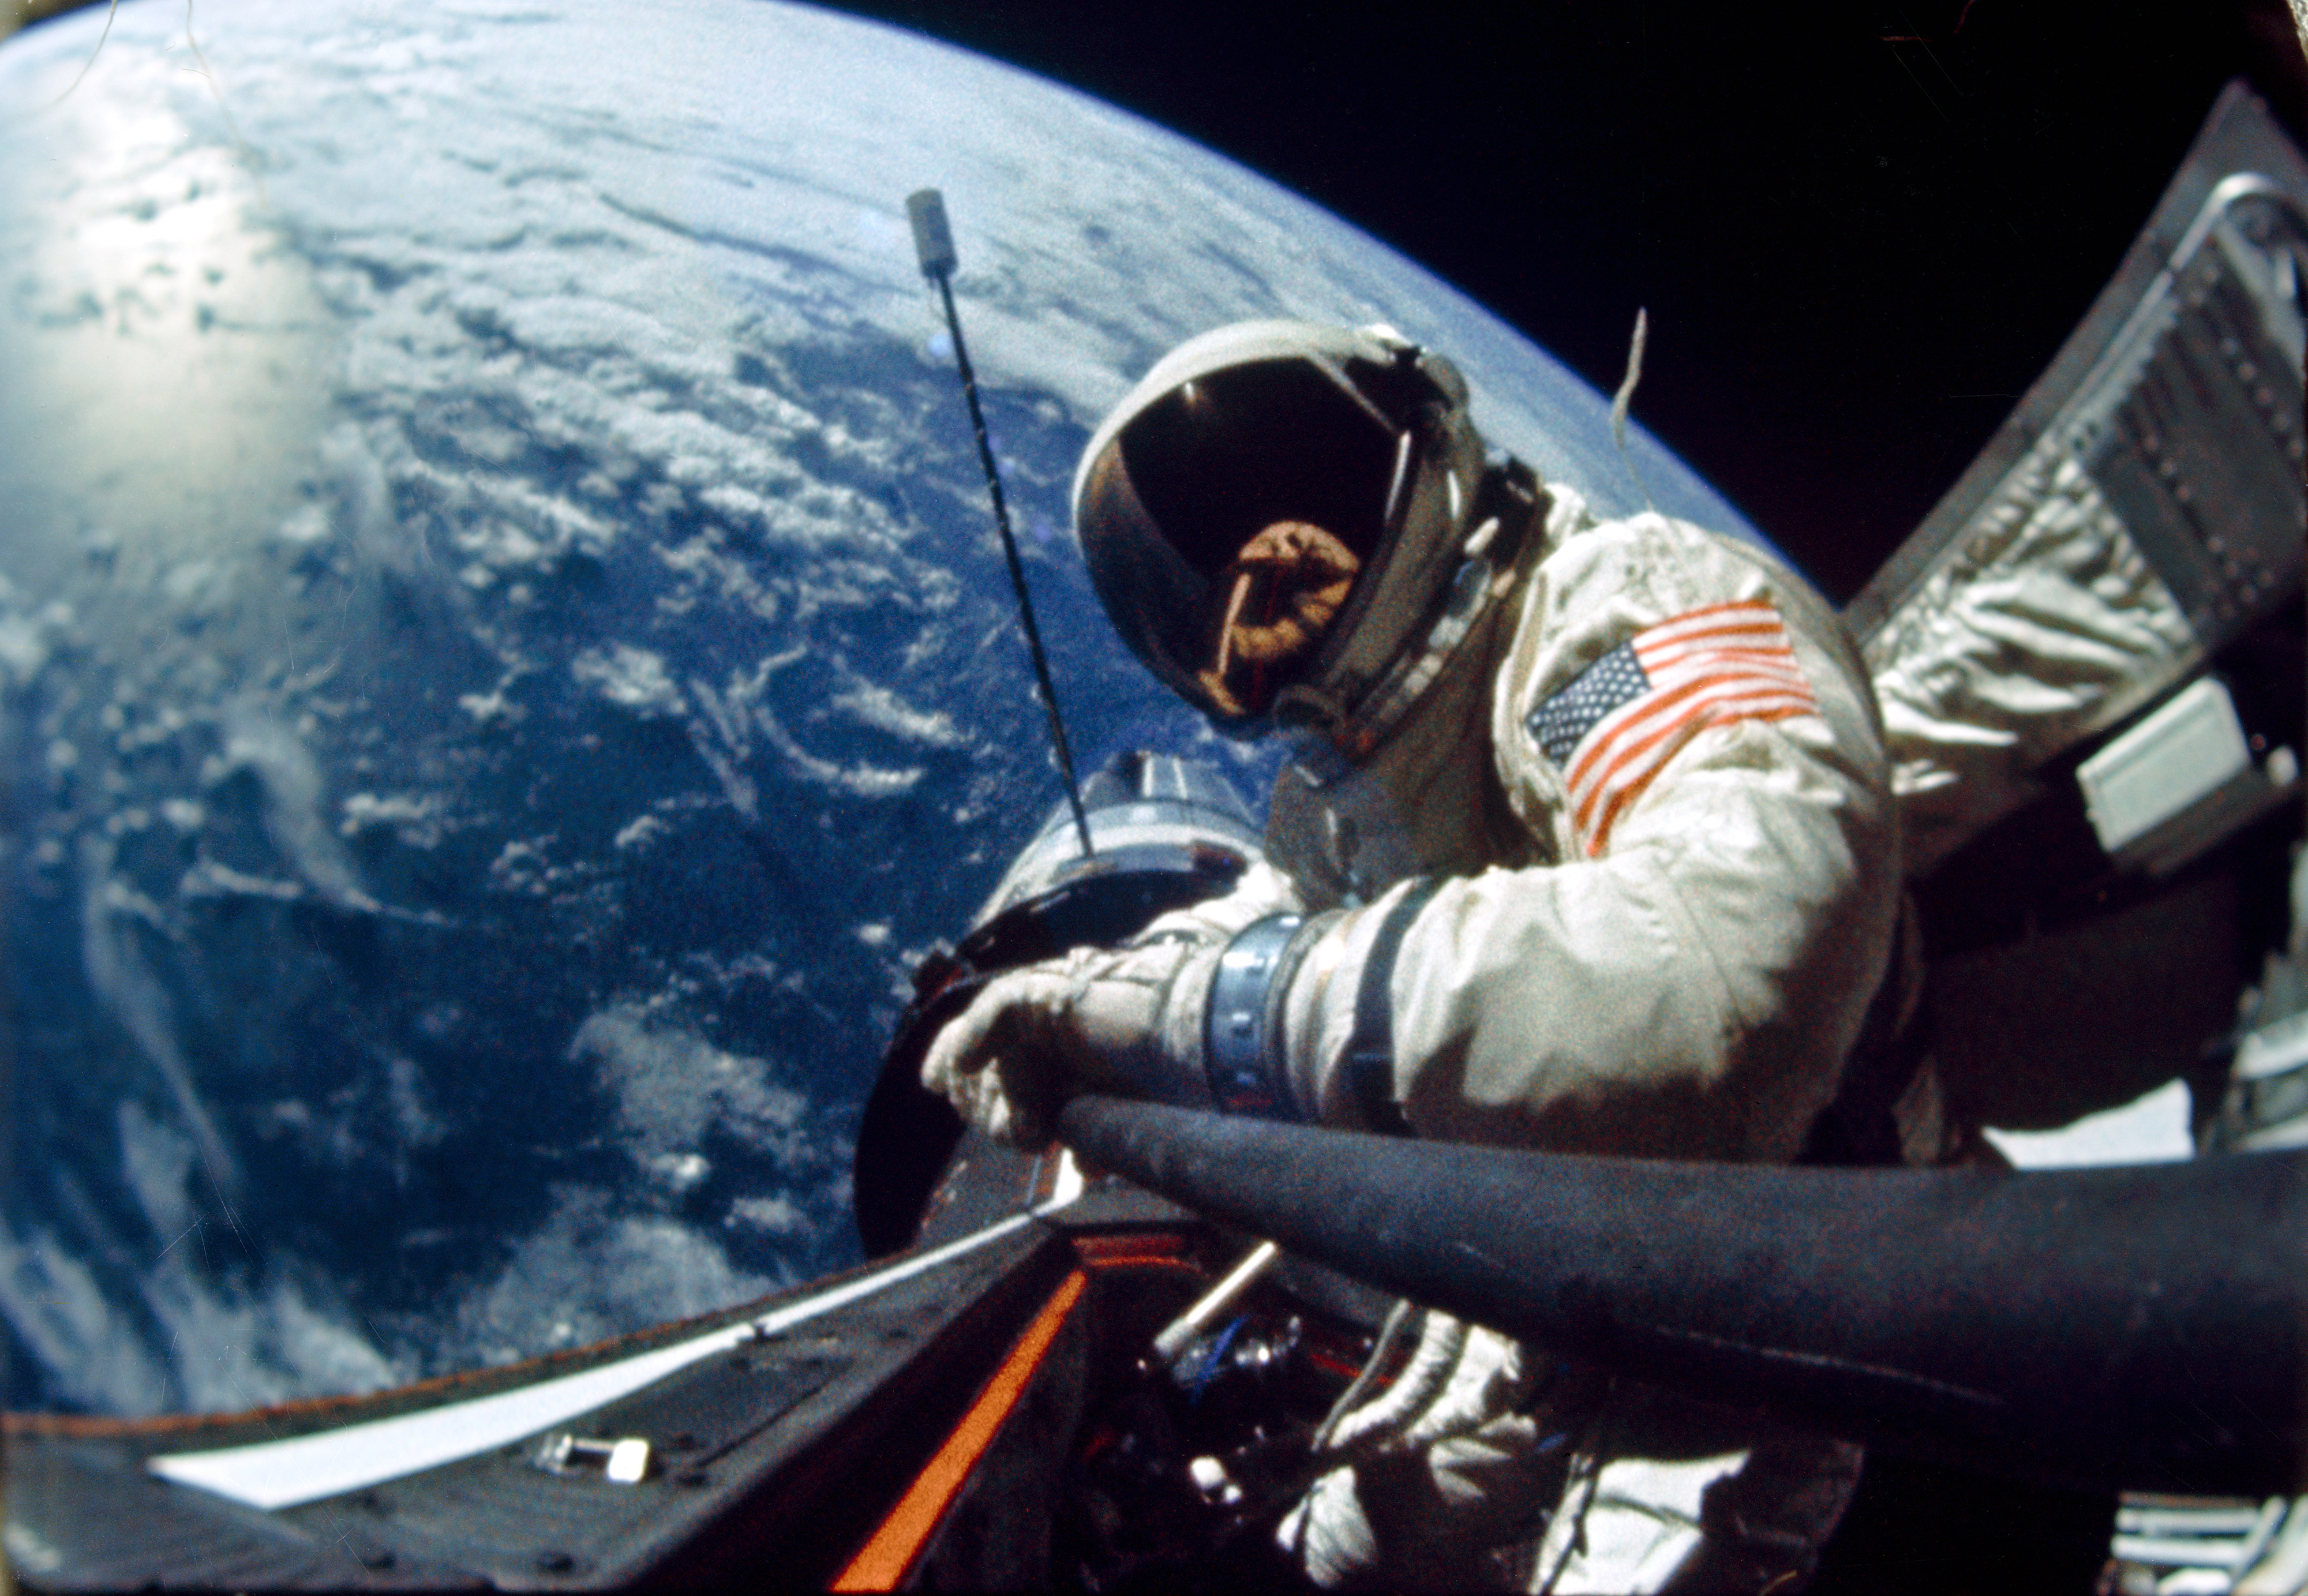 5. The first ever 'space selfie' ever taken by Buzz Aldrin on the Gemini 12 spacecraft, November 12th, 1966.